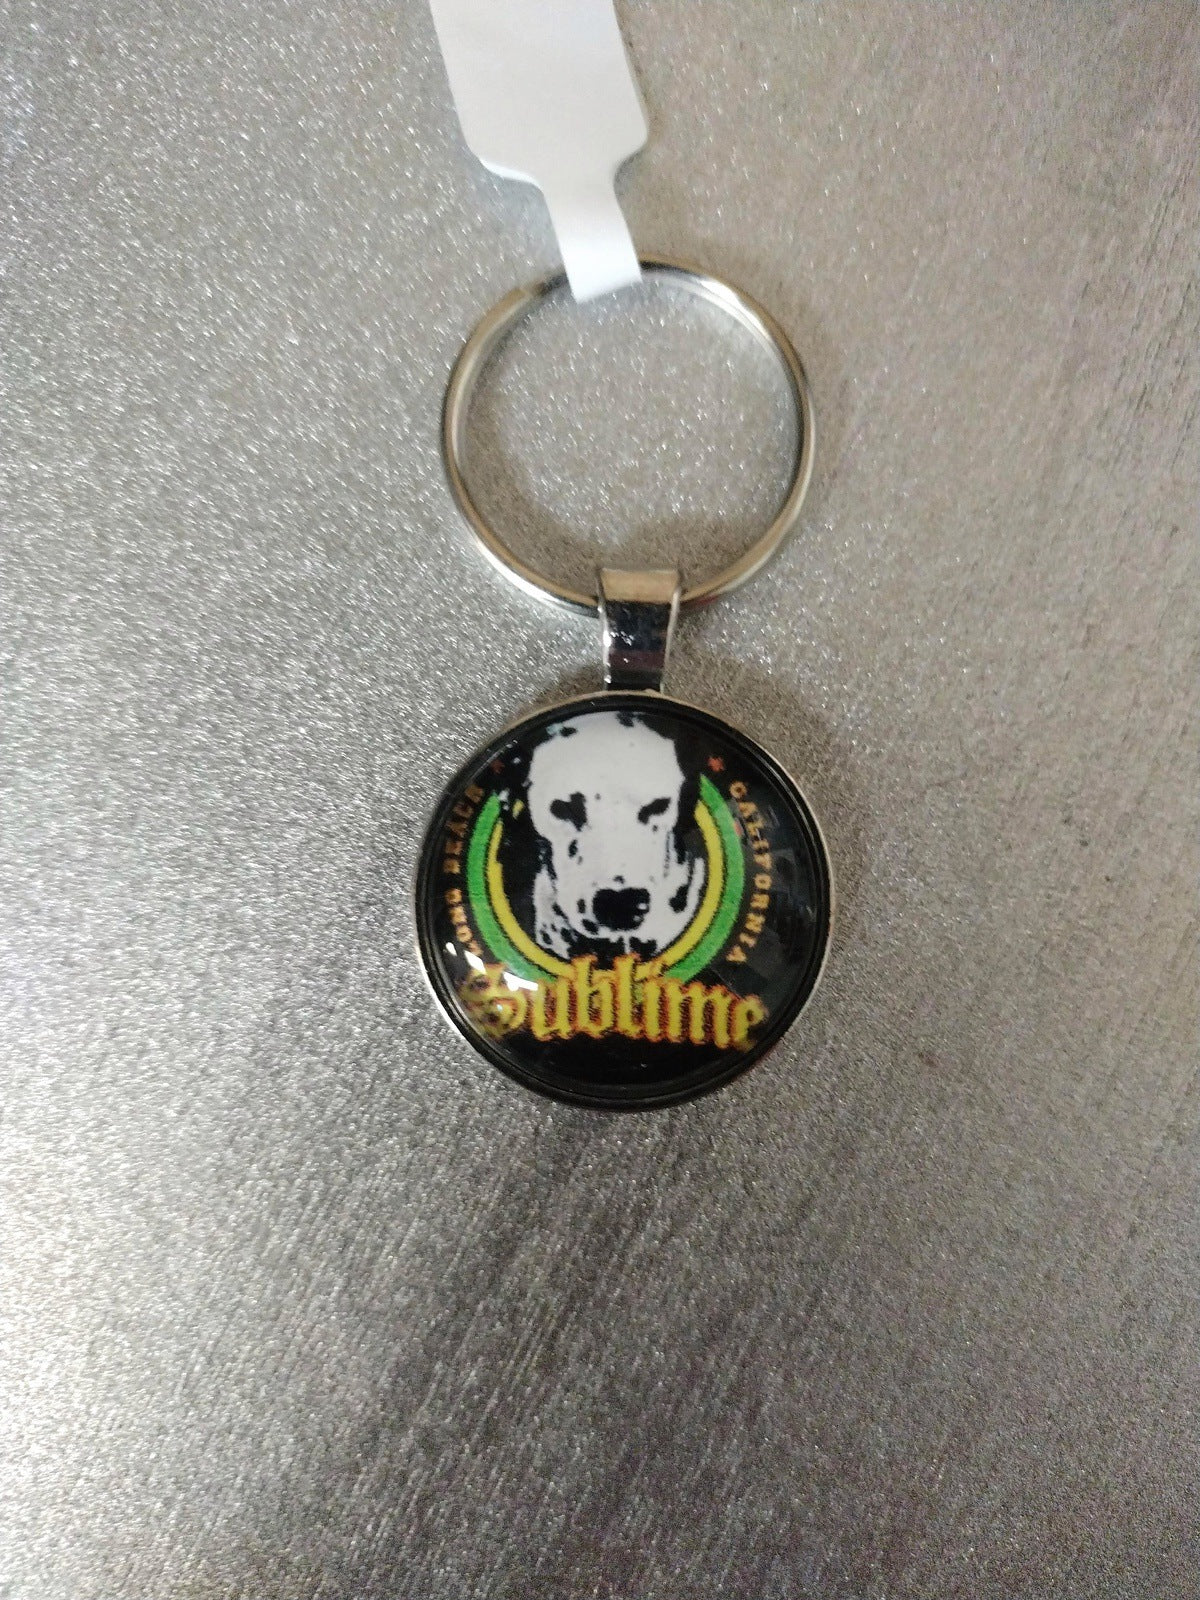 Sublime 1 Inch Keychain